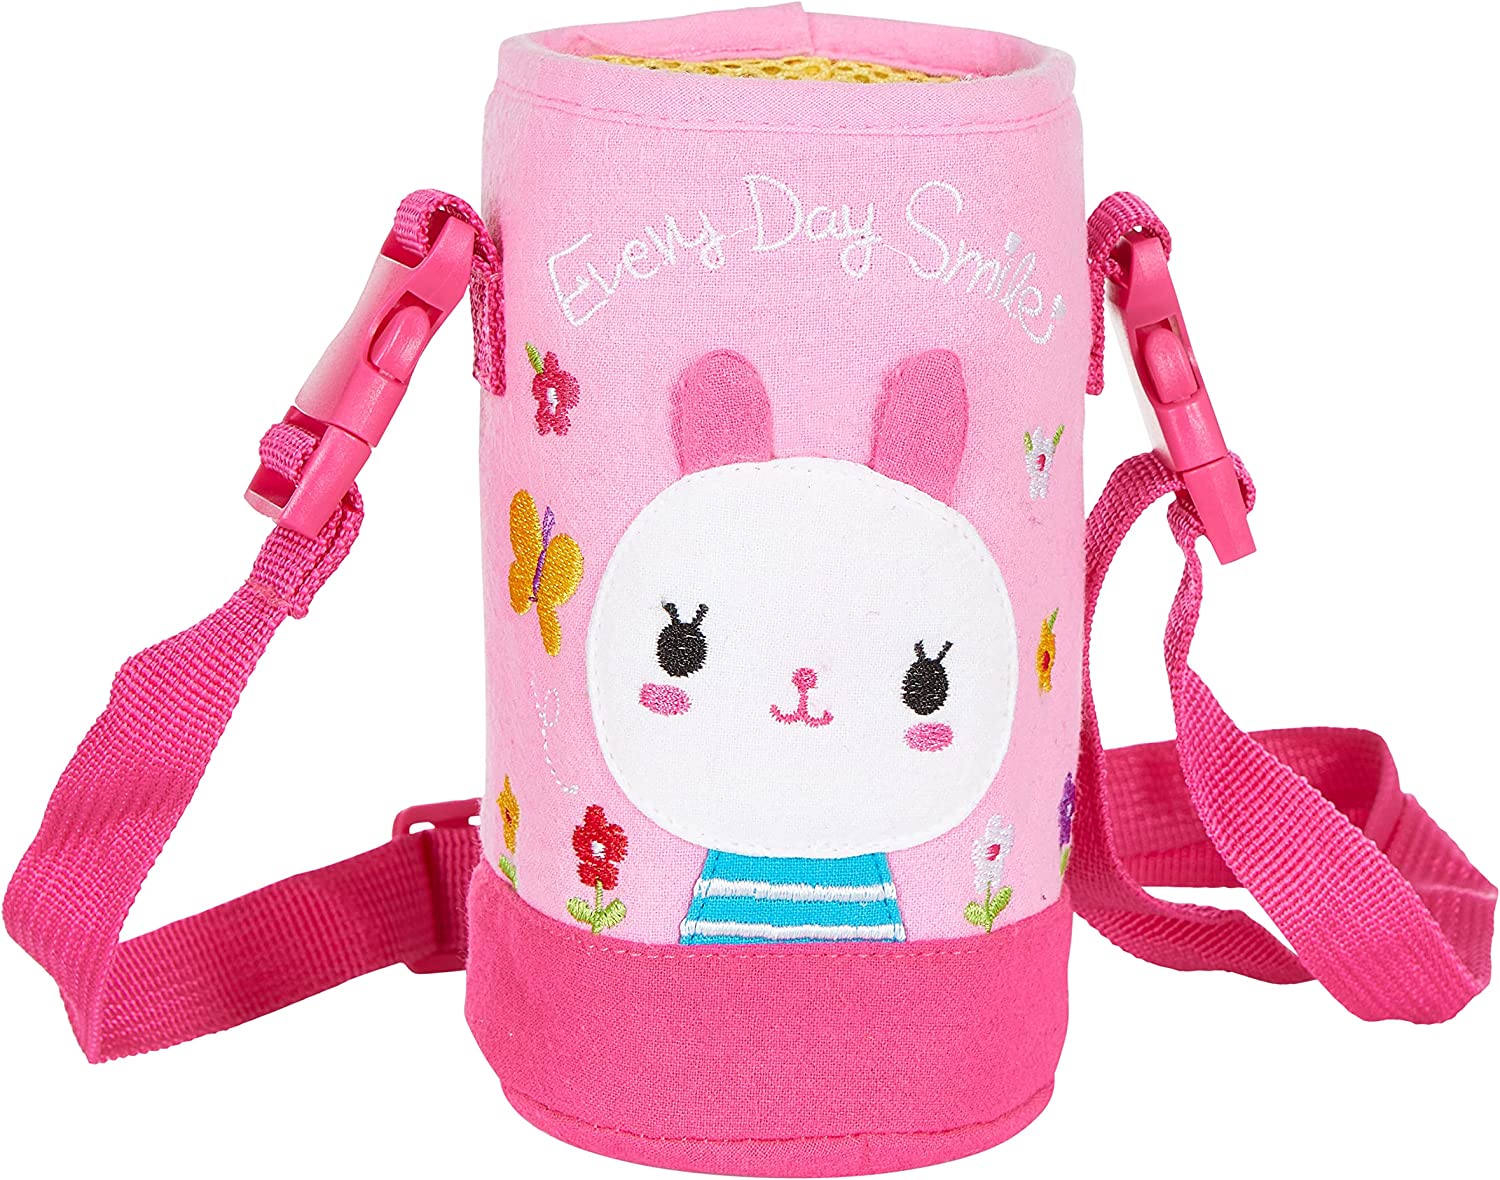 SKIDEE Water Bottle Pouch for Kids Scooters